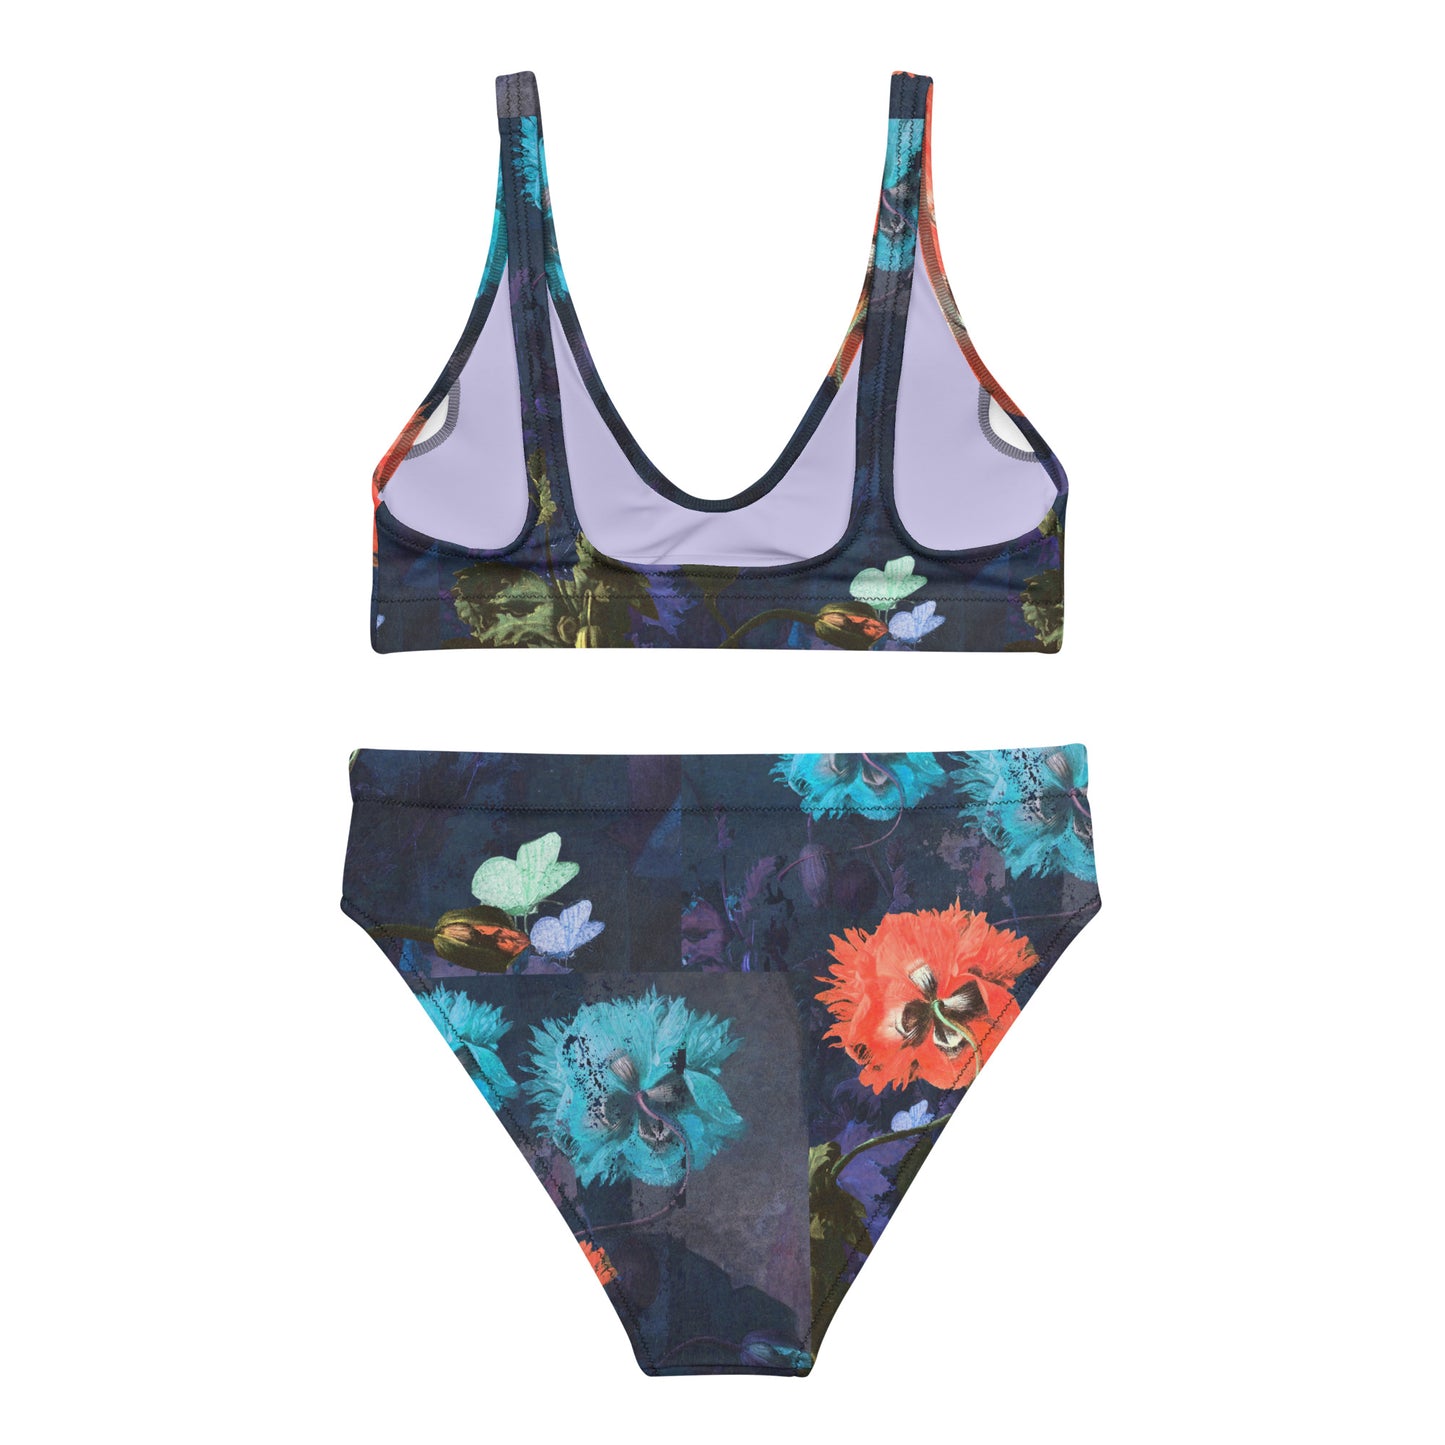 Exquisite Floral Recycled High-Waisted Bikini